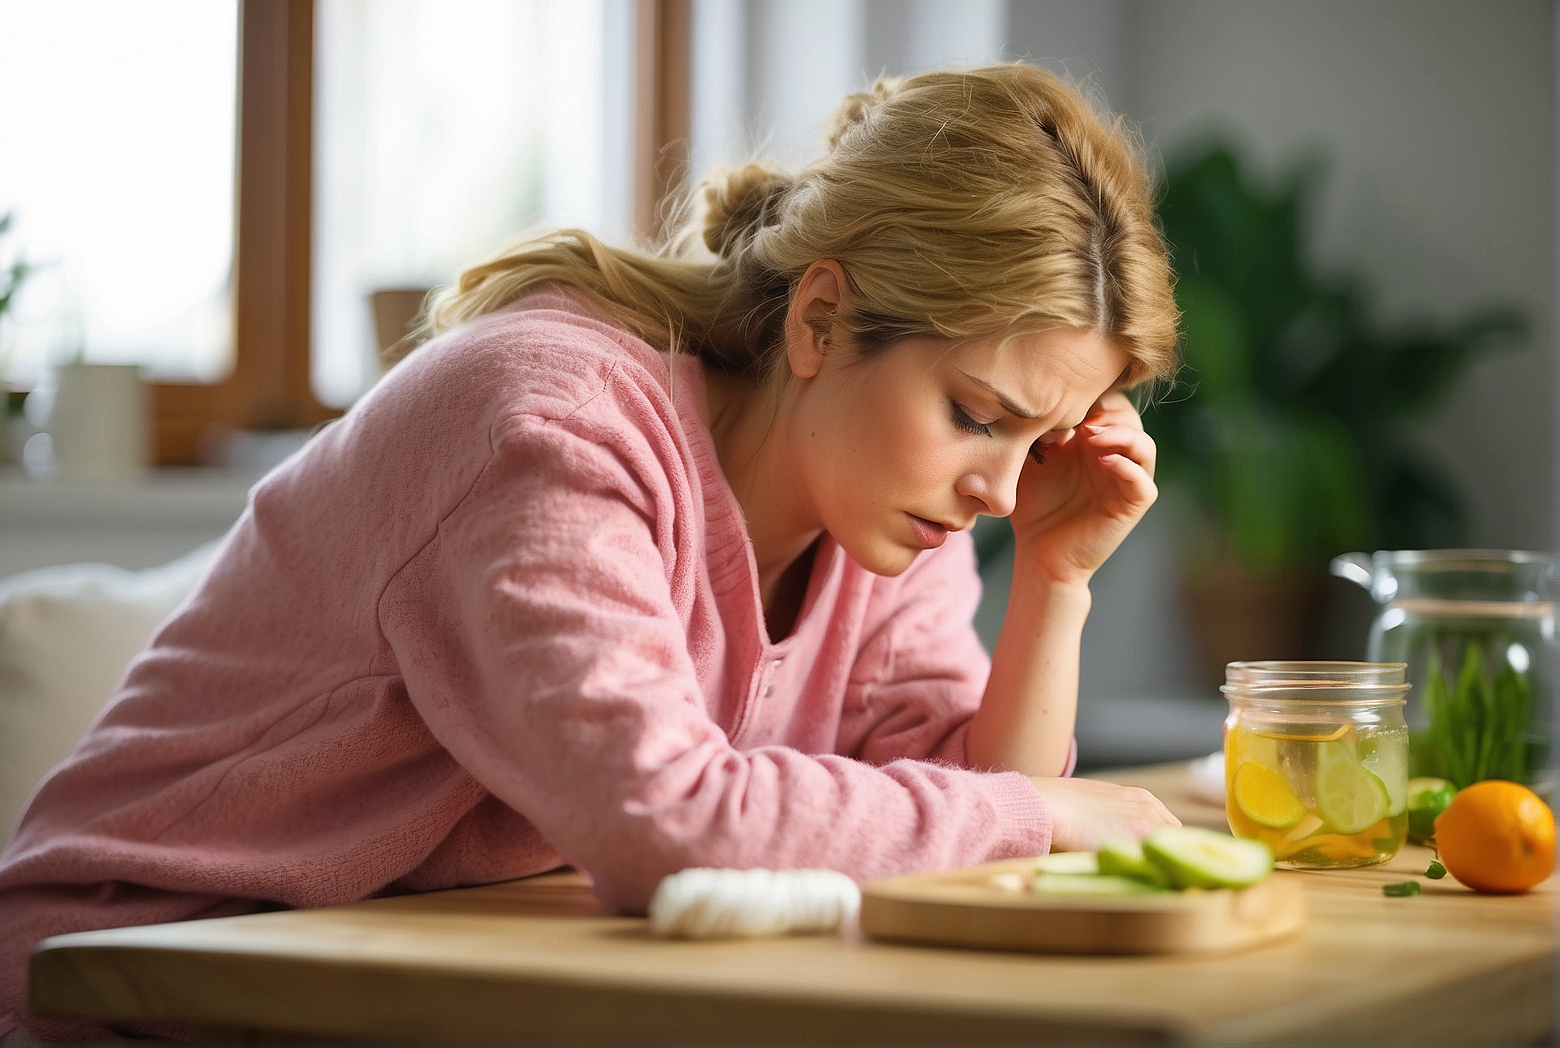 10 Home Remedies to Soothe a Stomach Bug